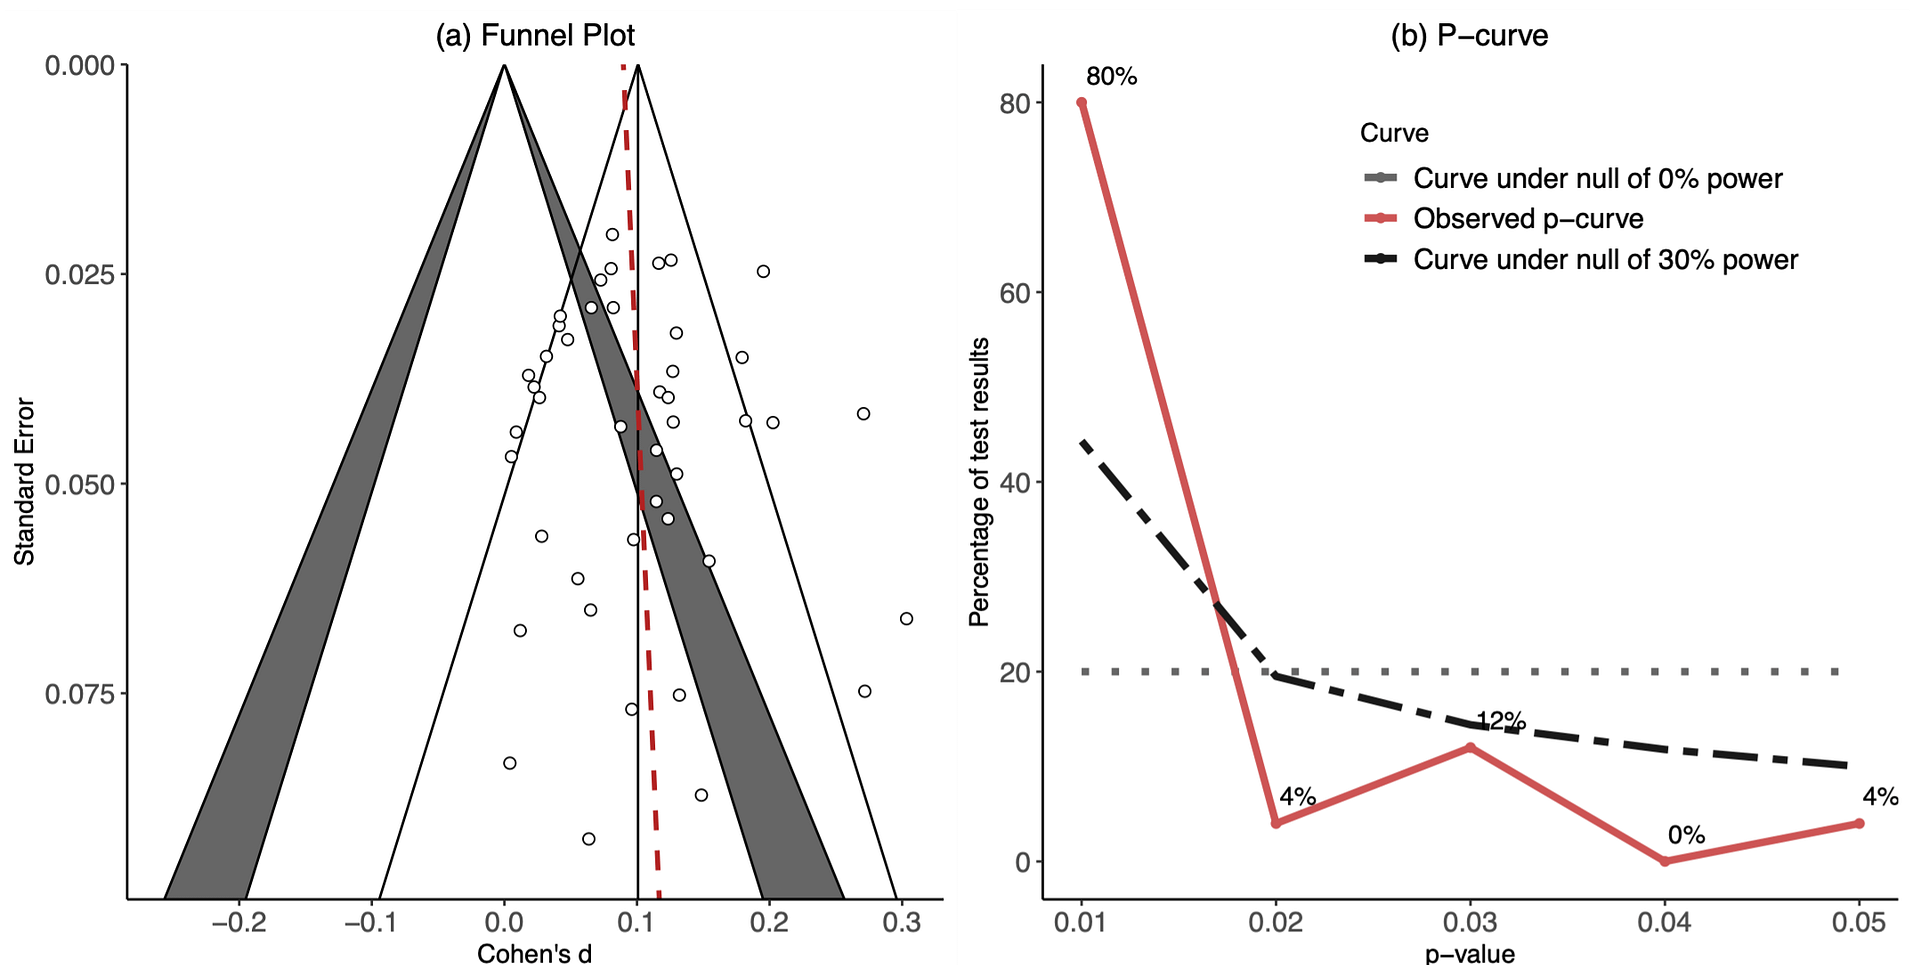 Funnel plot and P-curve for evidence of potential bias